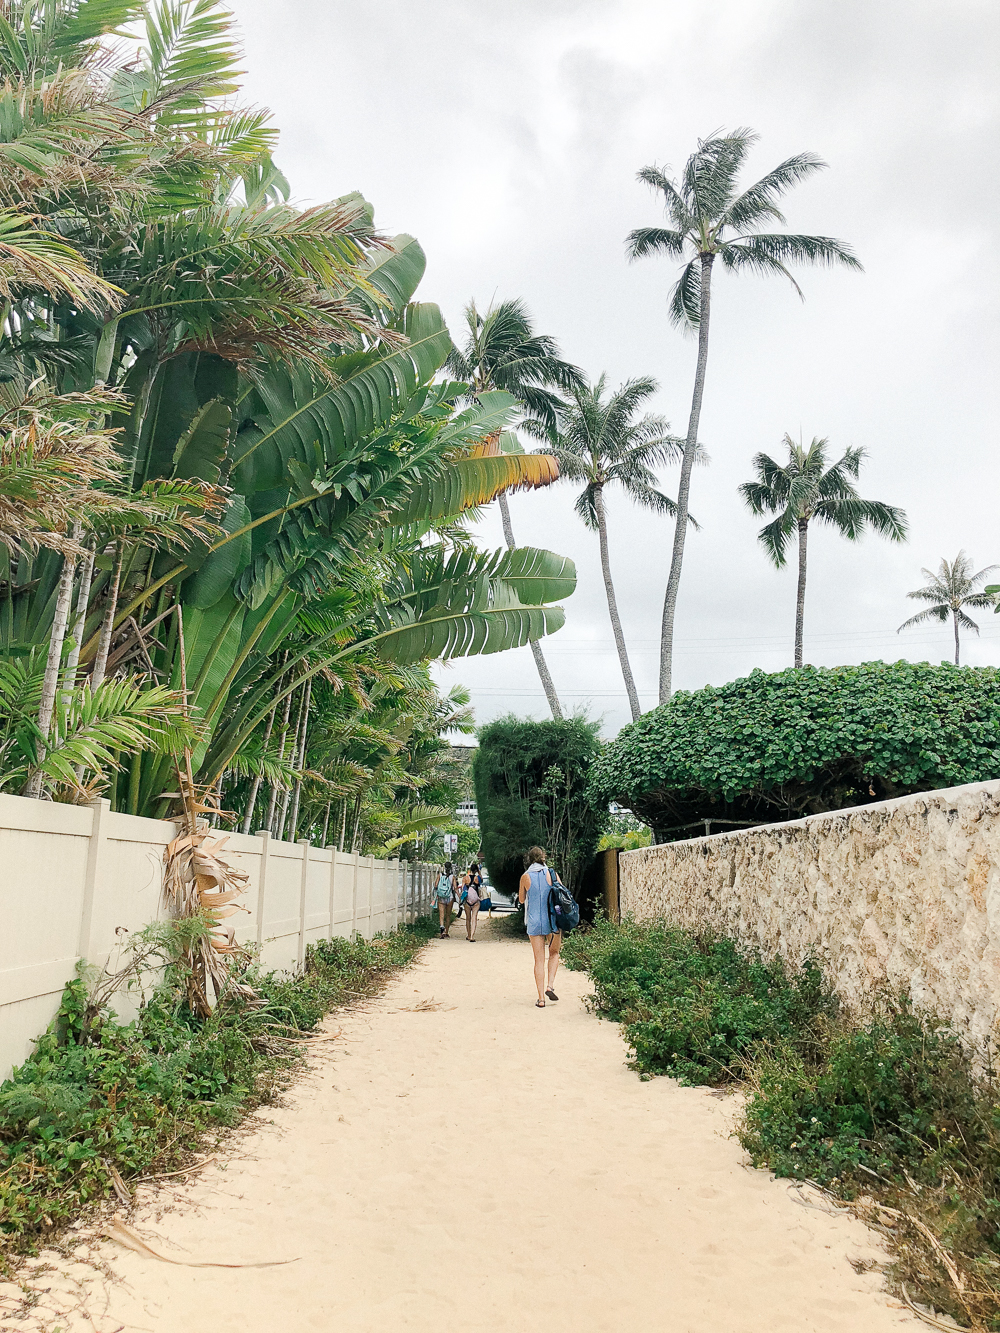 The Ultimate Oahu Travel Guide for the Adventurer - Lanikai Beach Entrance | Sunshine Style